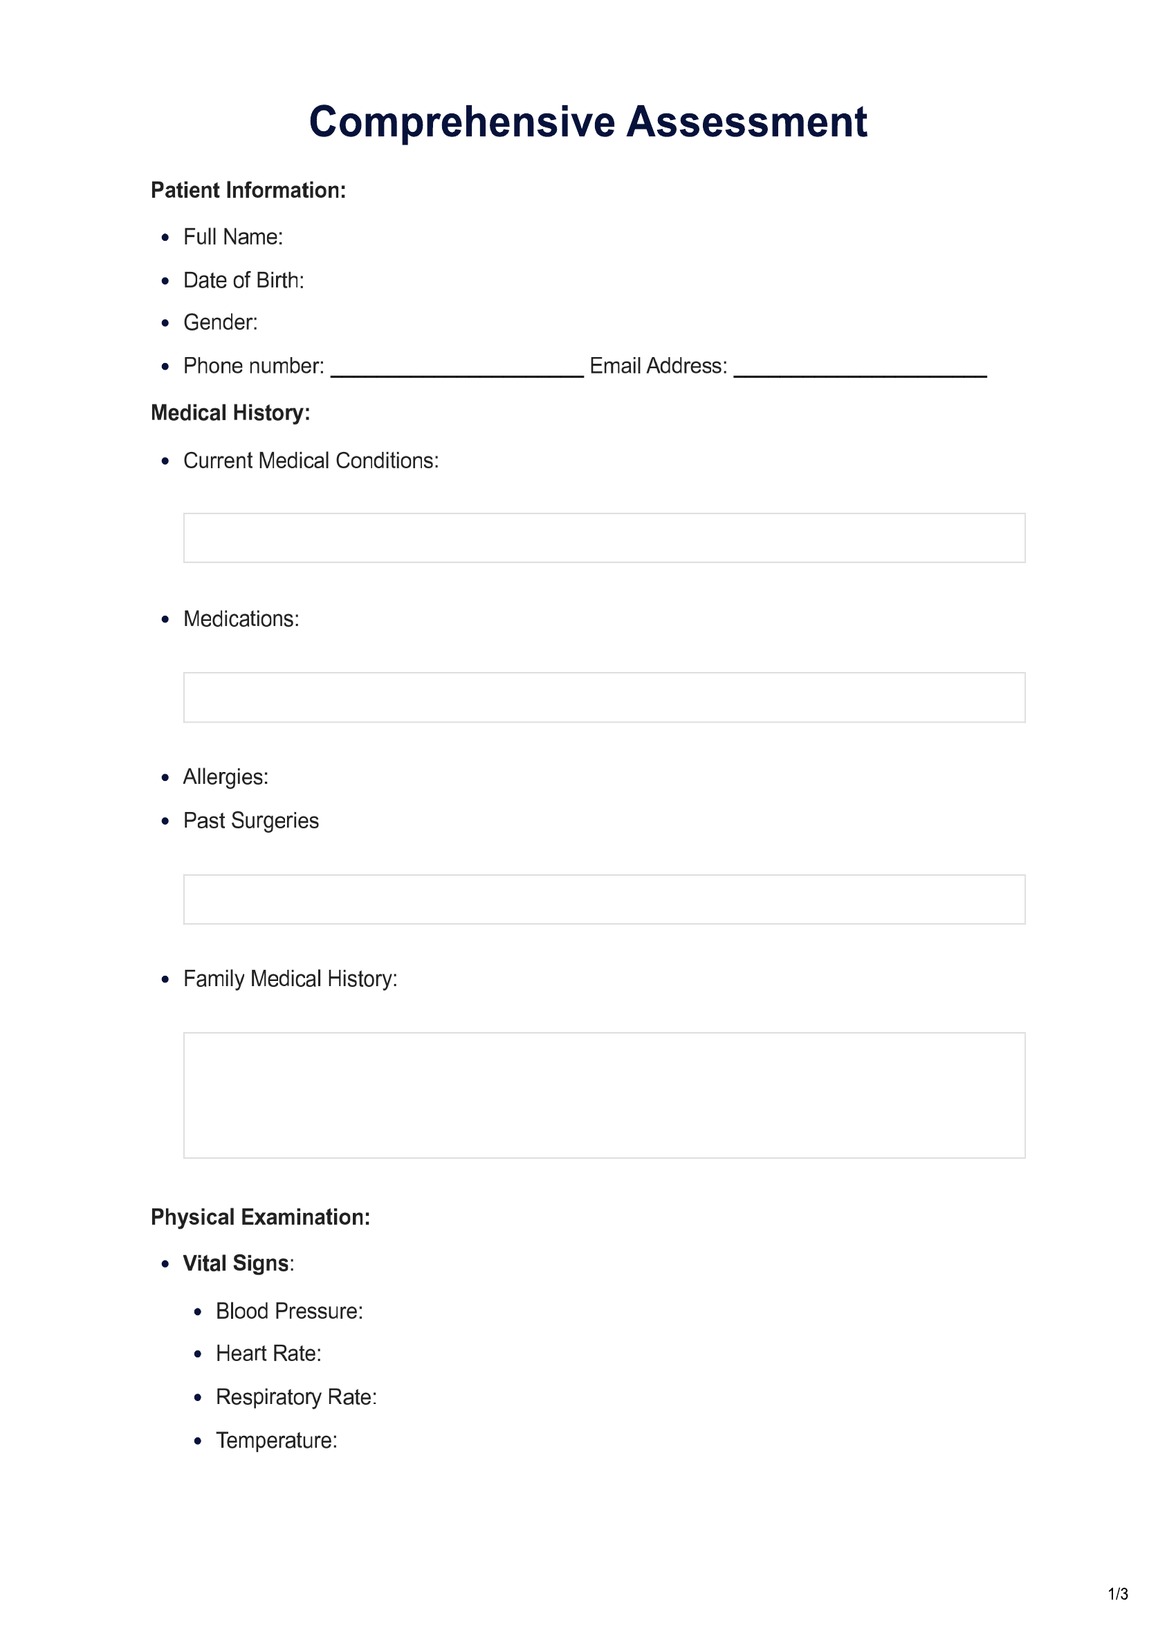 Comprehensive Assessments PDF Example